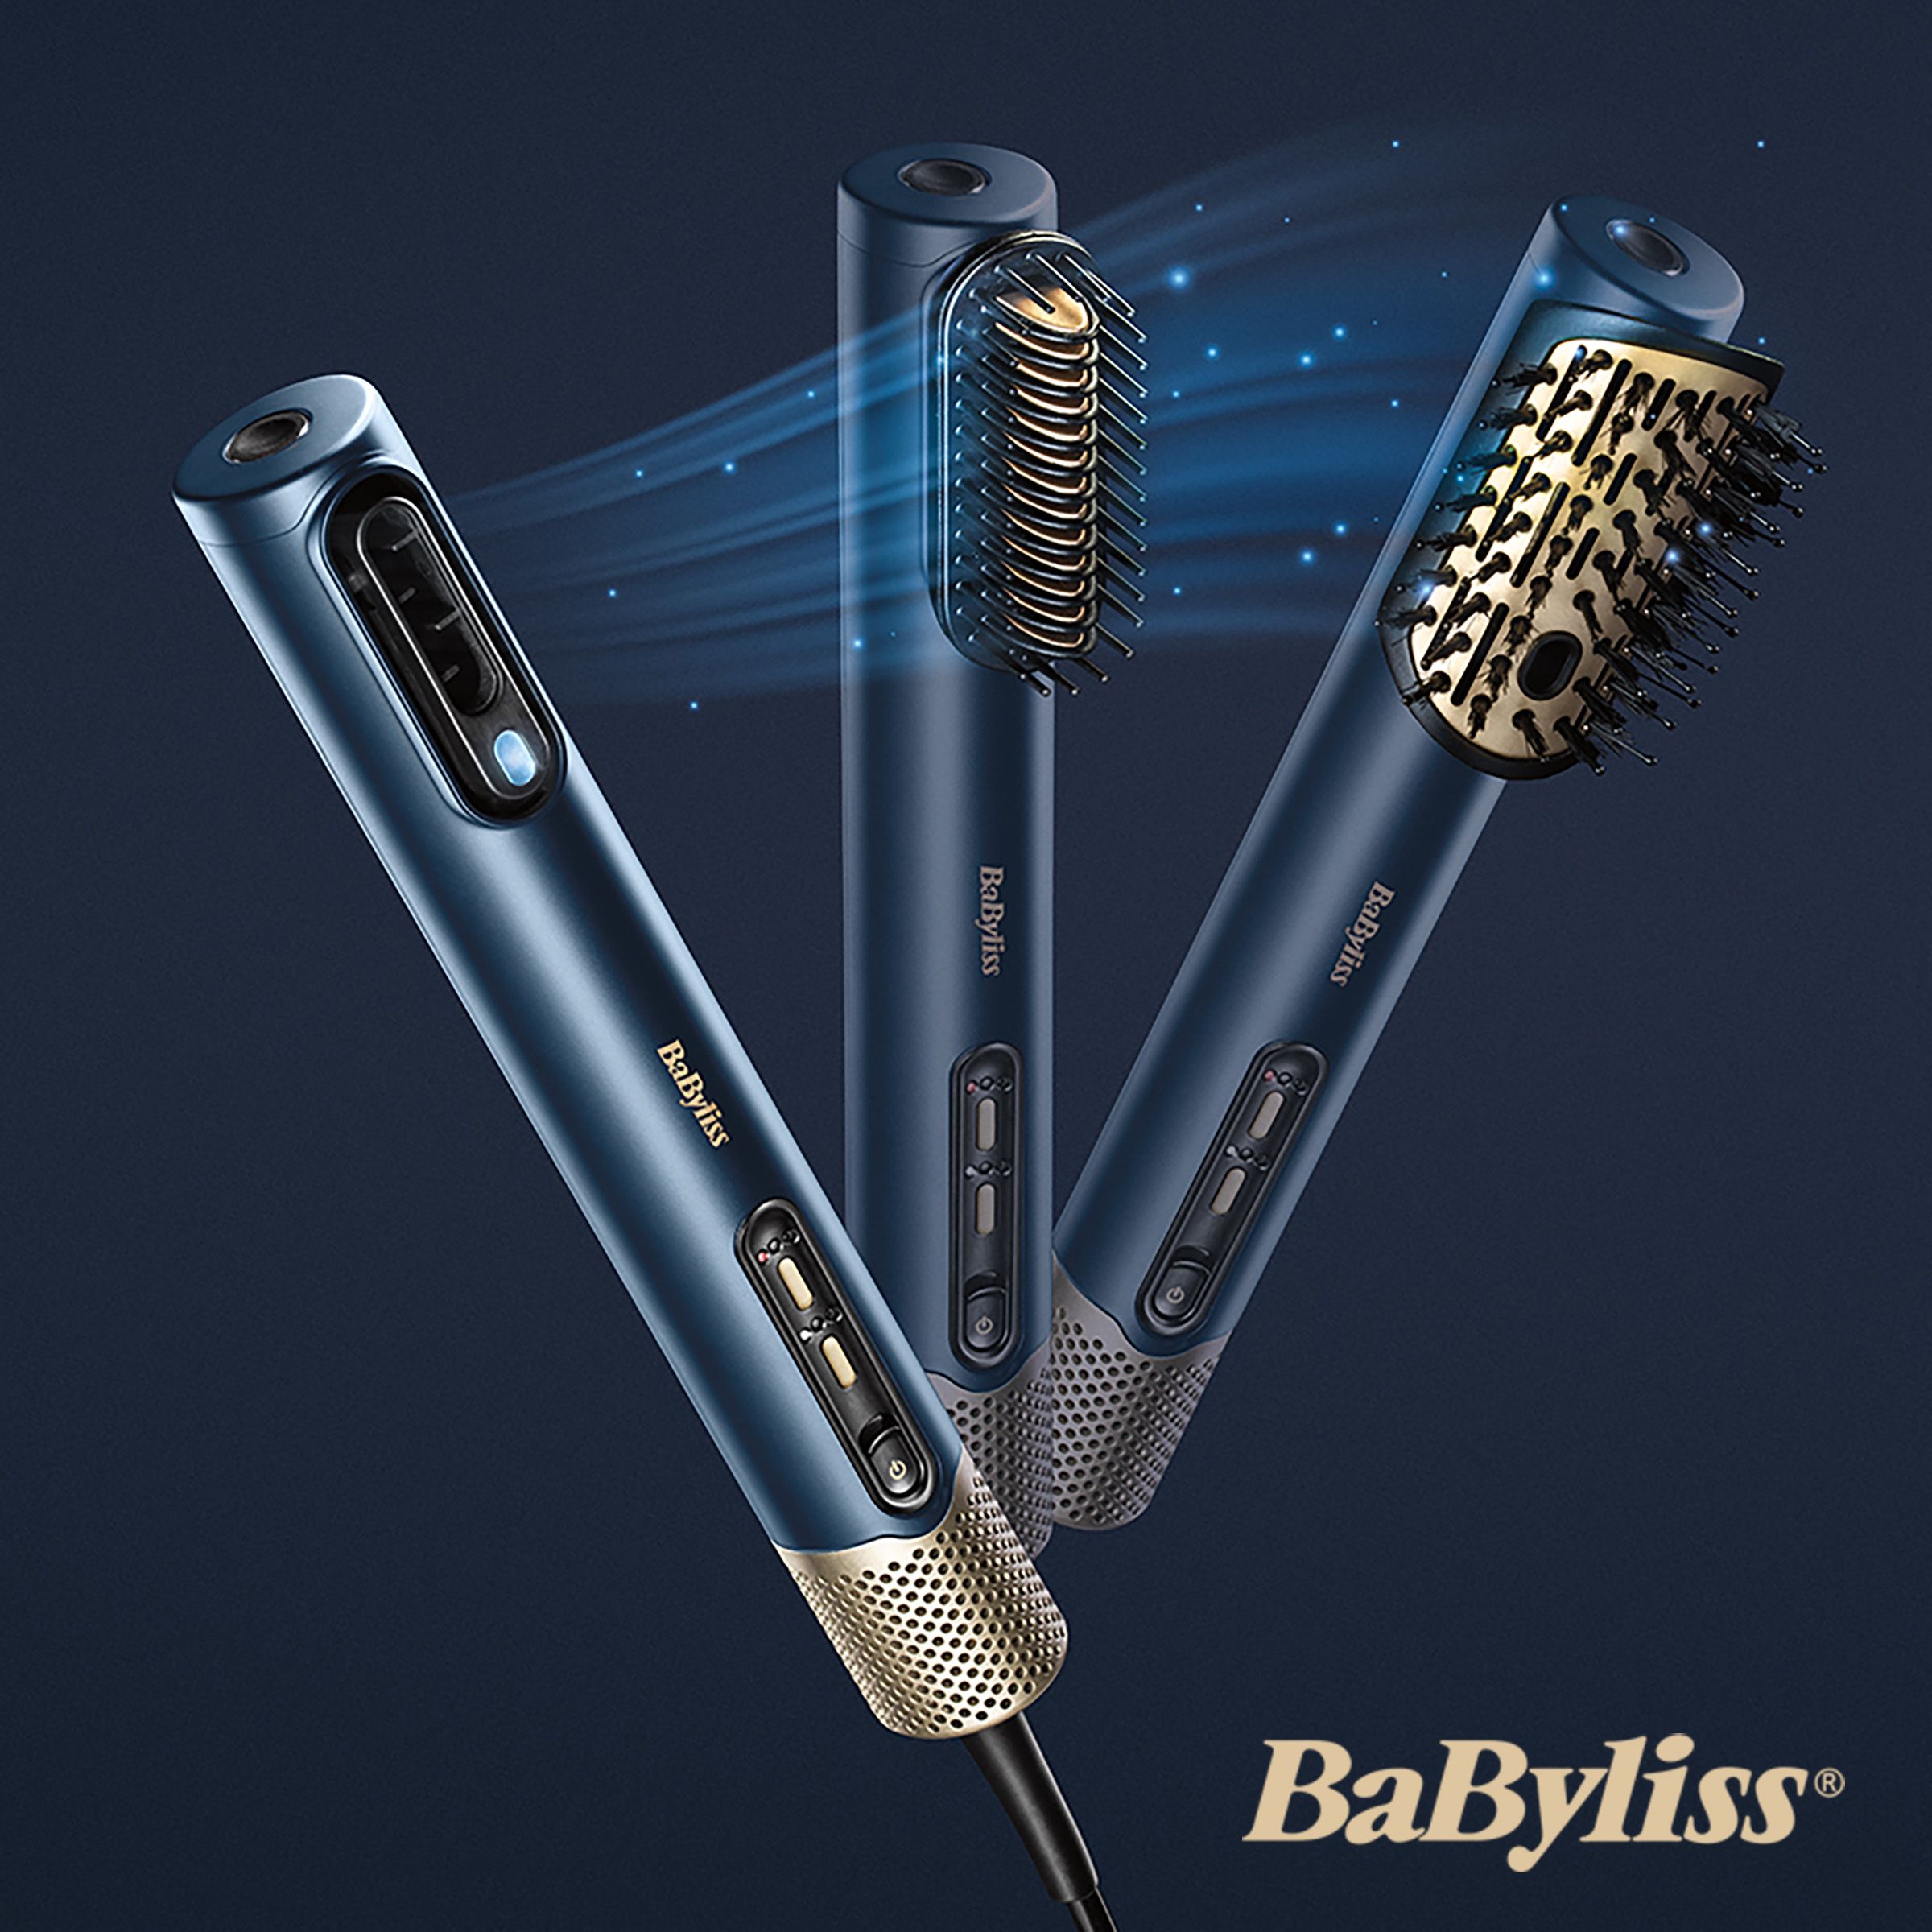 Babyliss Hair care products on a navy blue background